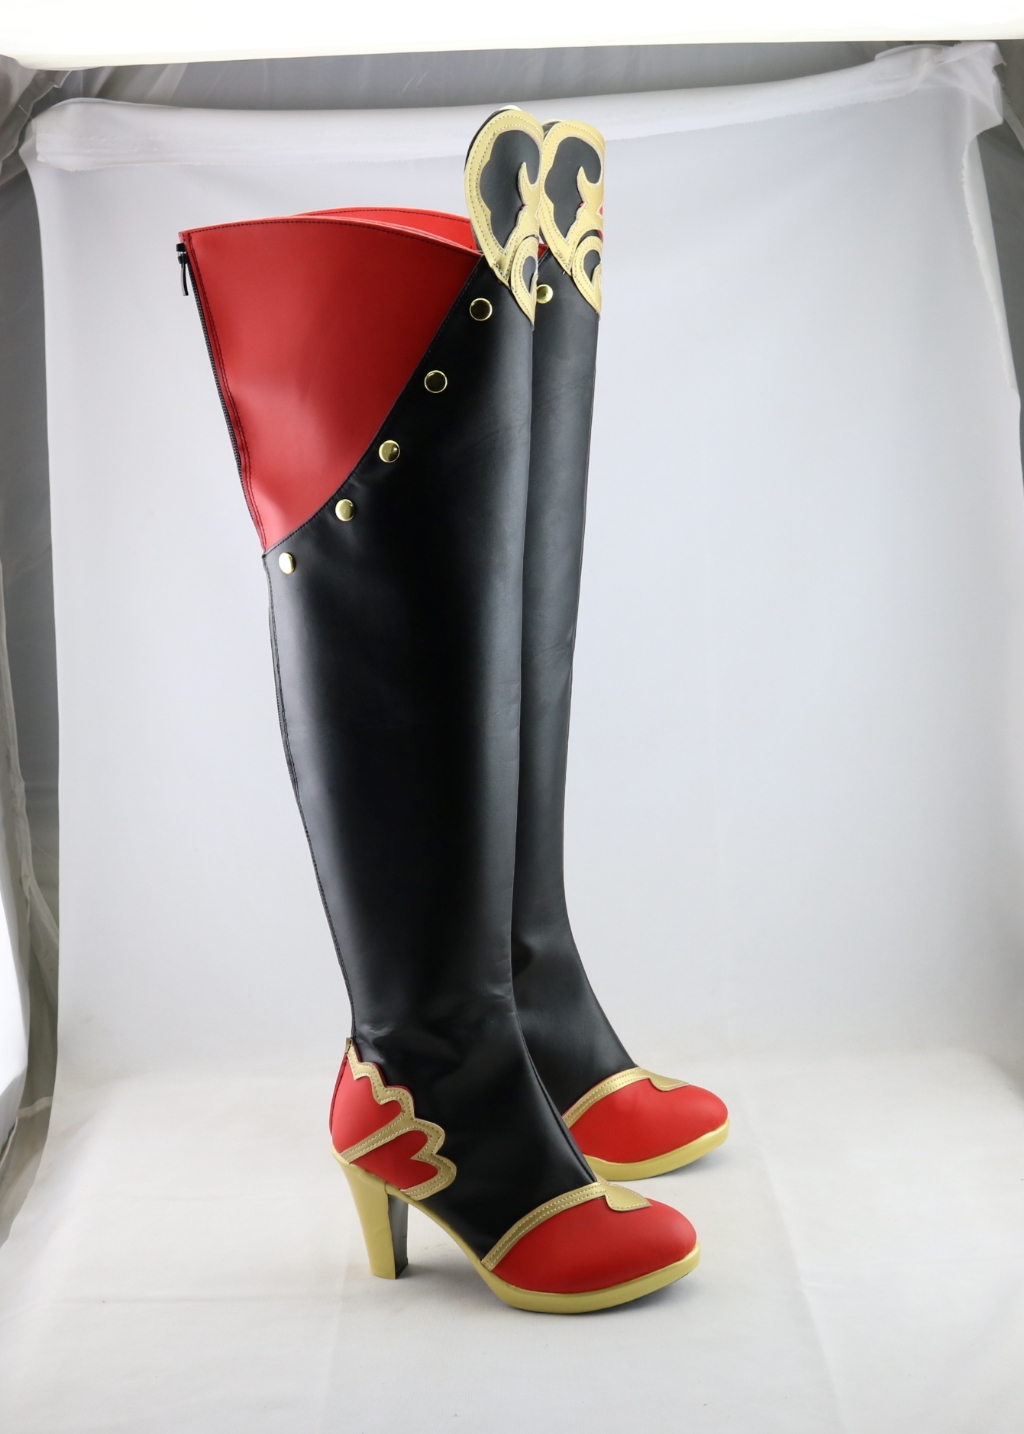 Riddle Rosehearts Shoes Men Twisted Wonderland Boots Cosplay